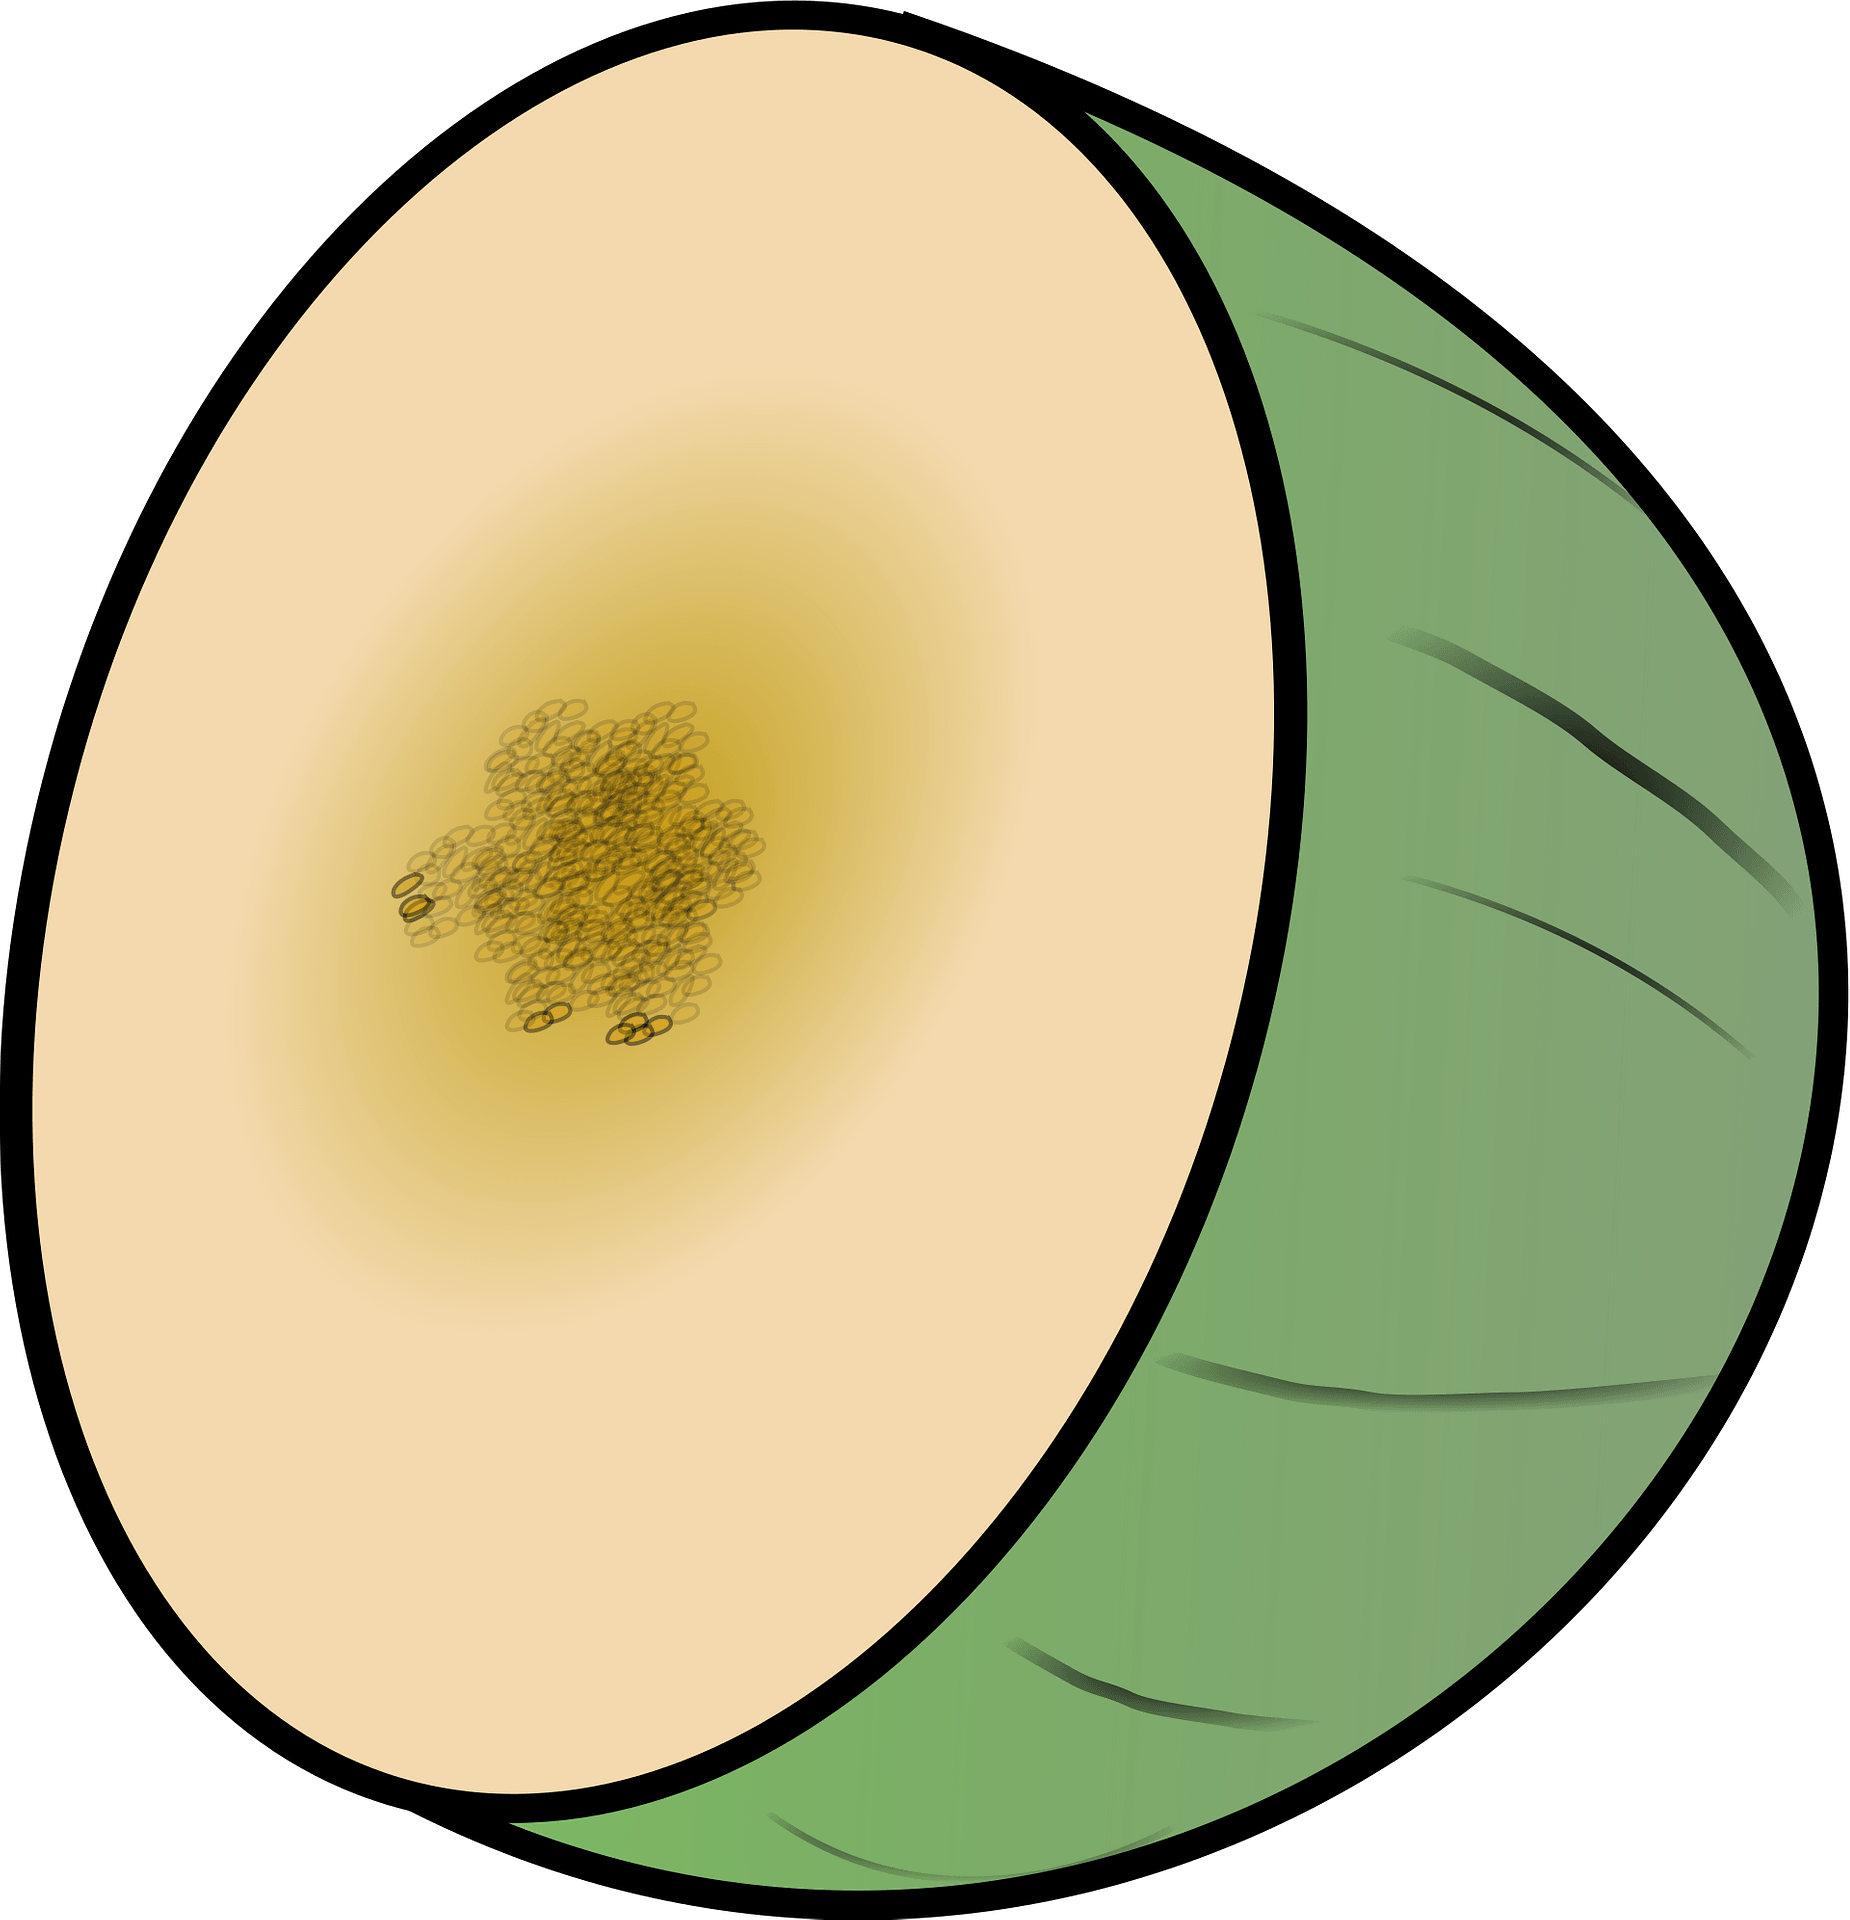 Download PNG image - Green Cantaloupe PNG Image 